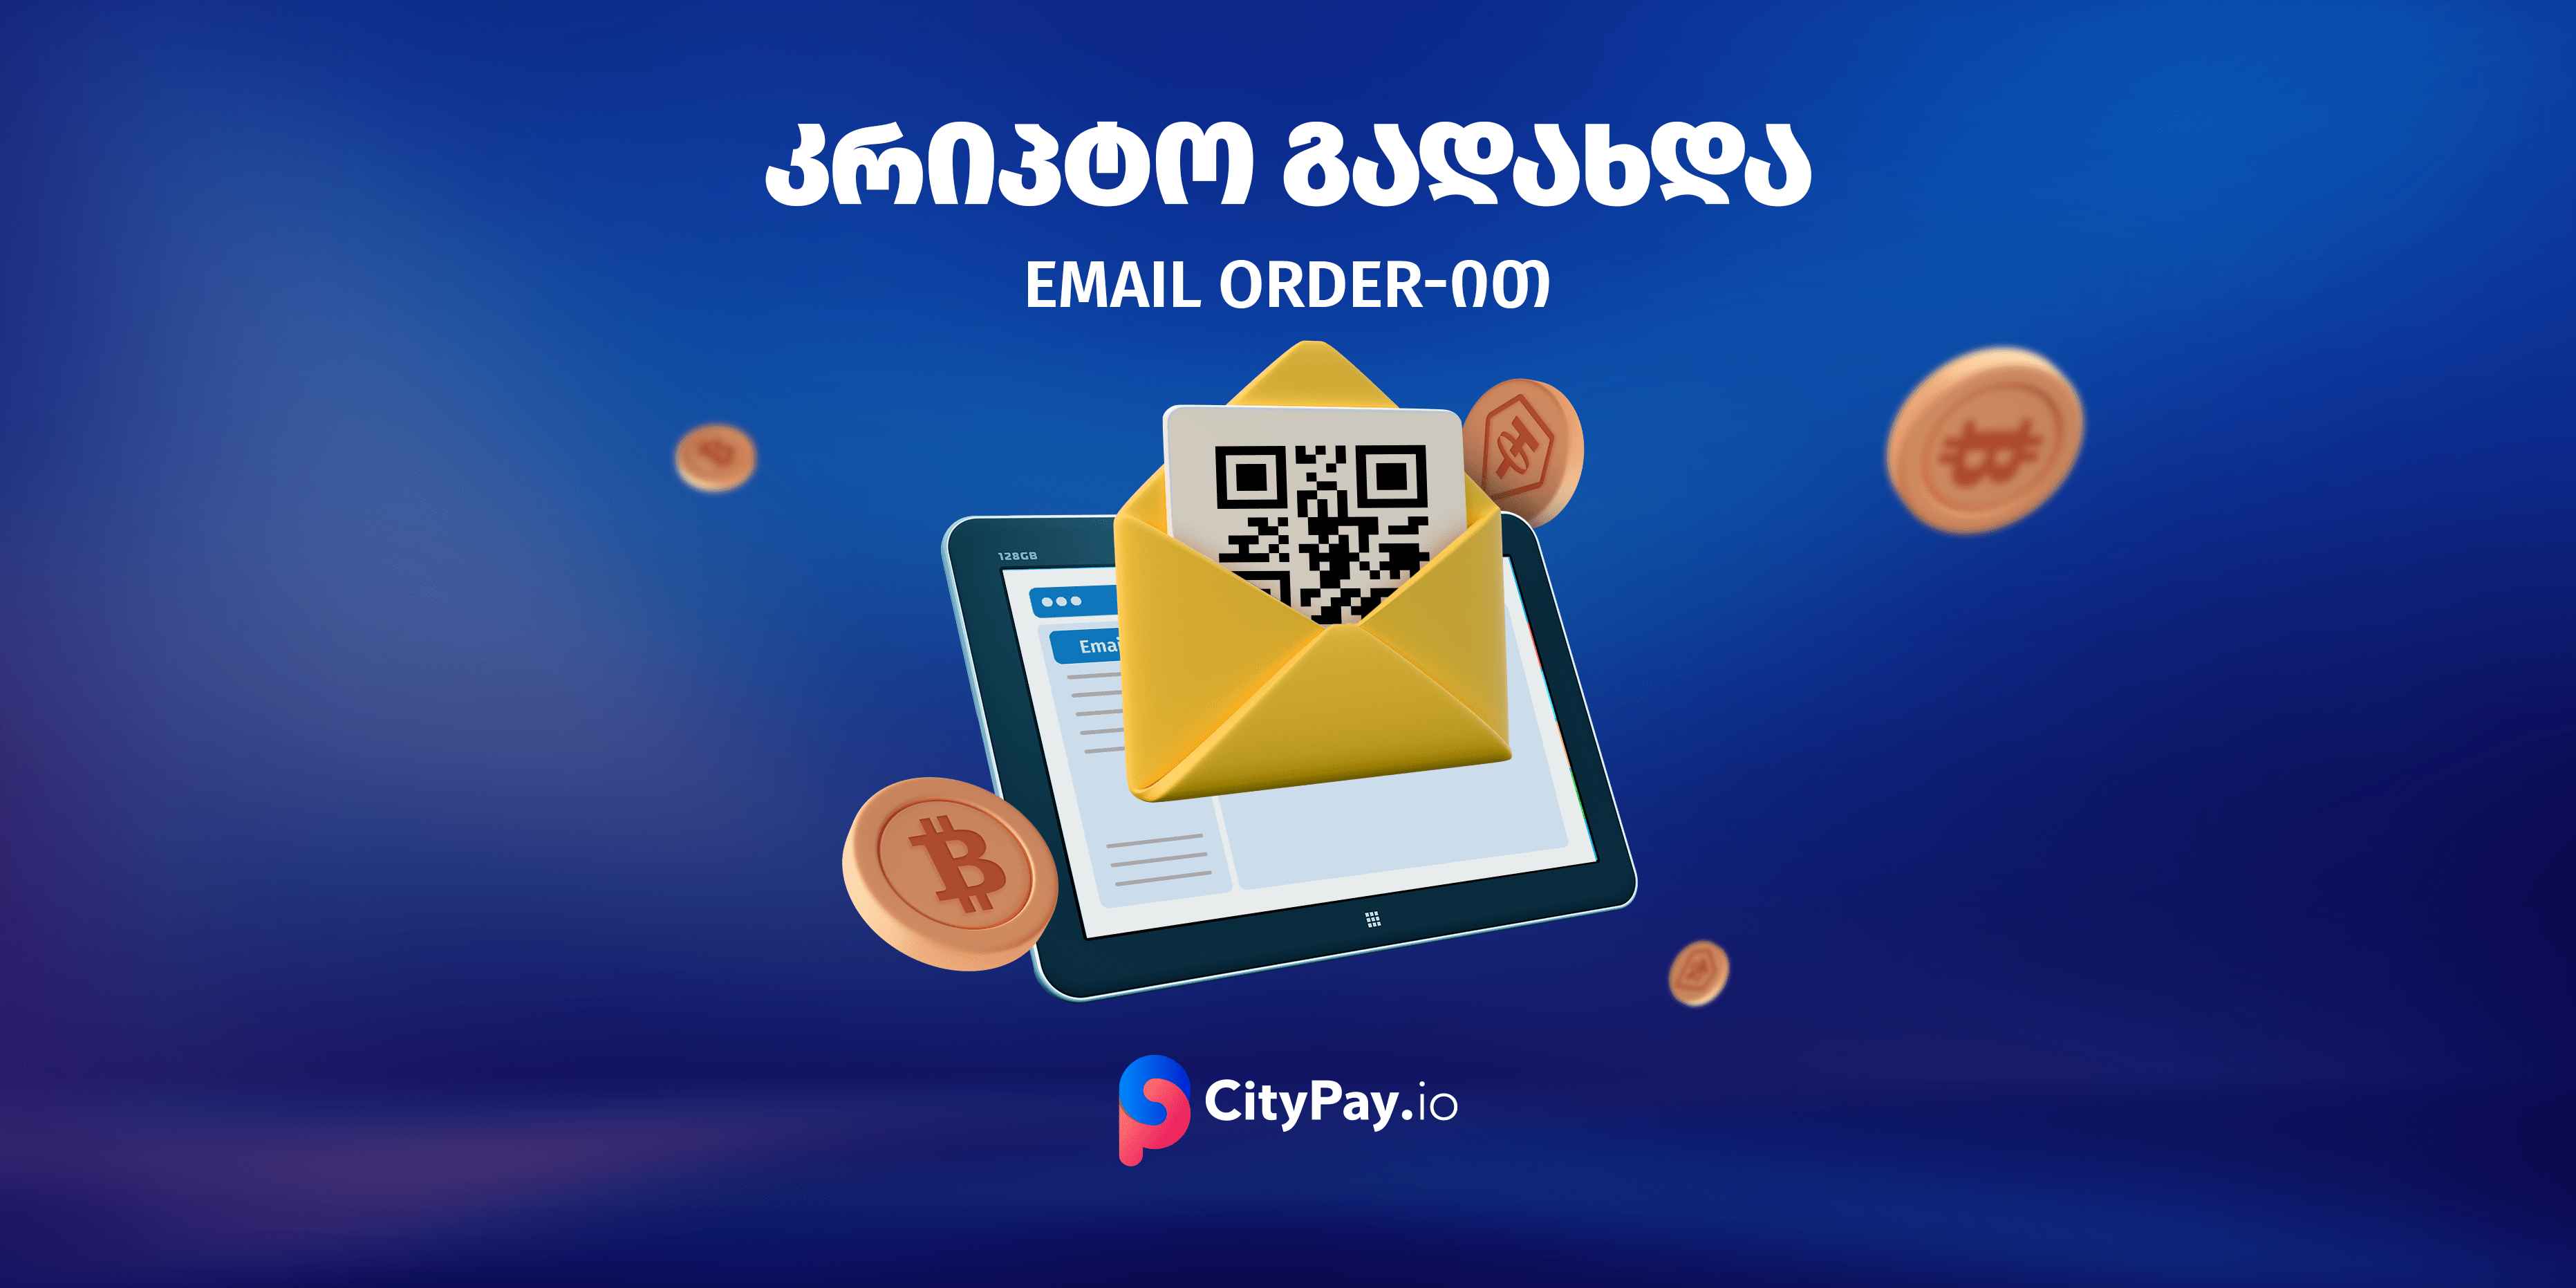 Email order service for crypto payments